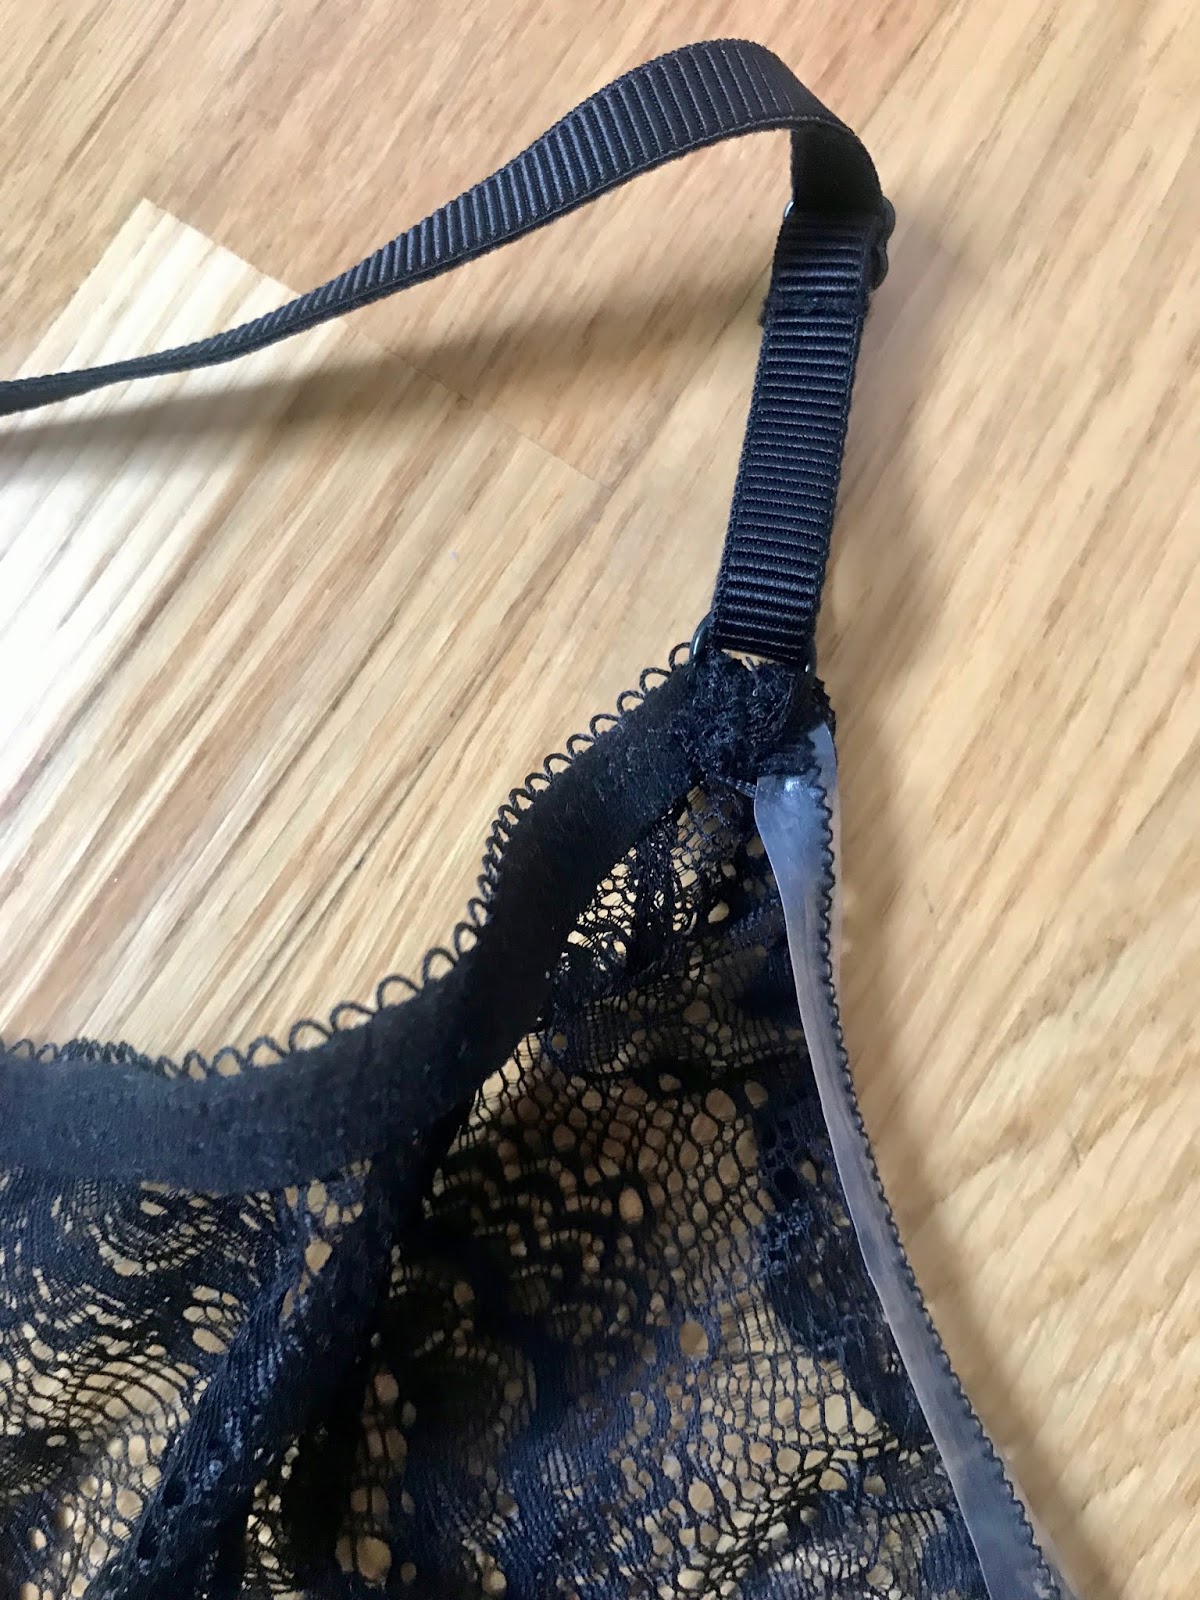 Fit2Sew – Bra-Making Supplies and Classes